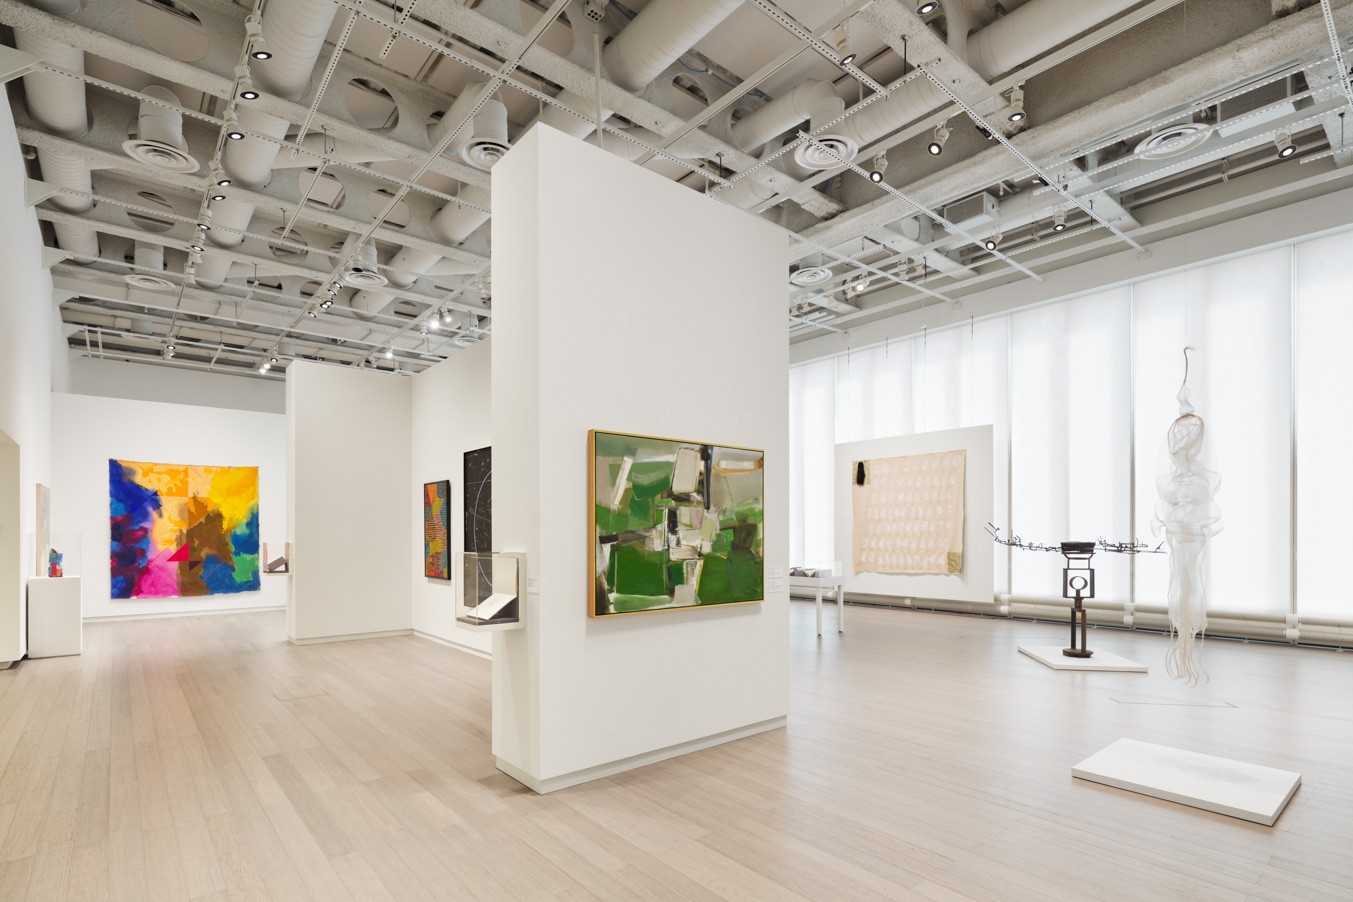 Installation view of the exhibition "Dead Lecturer / distant relative: Notes from the Woodshed 1950-1980" curated by Genji Amino. On view at the Wallach Art Gallery, Columbia University, July 9 - October 1, 2022.